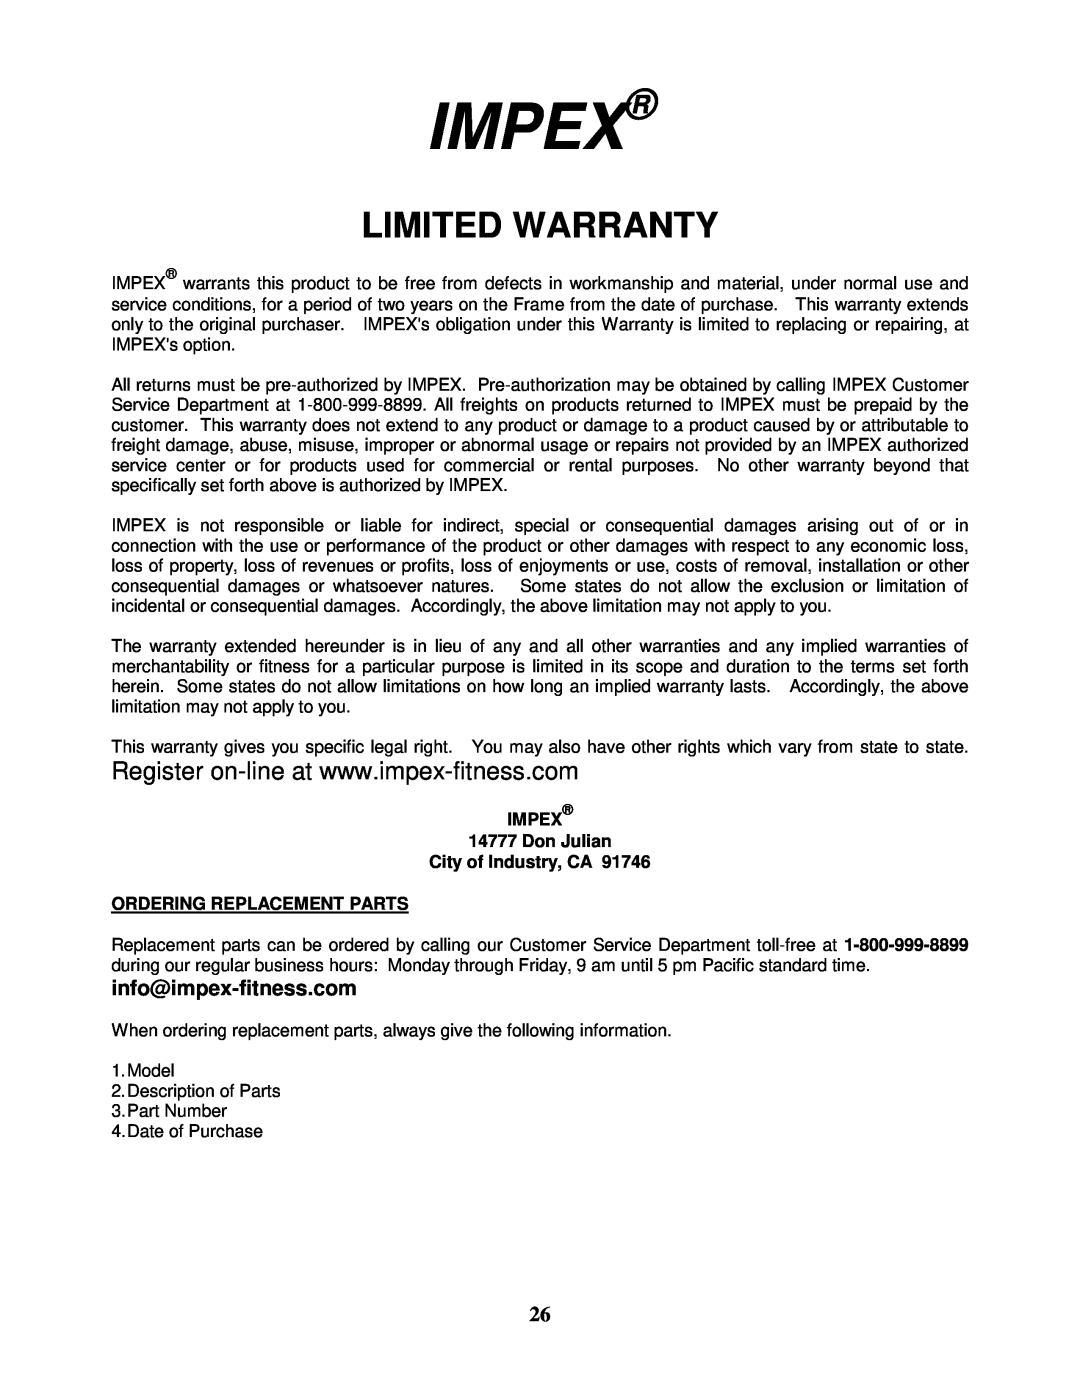 Impex MP-3105 manual Impex, Limited Warranty, IMPEX 14777 Don Julian City of Industry, CA, Ordering Replacement Parts 